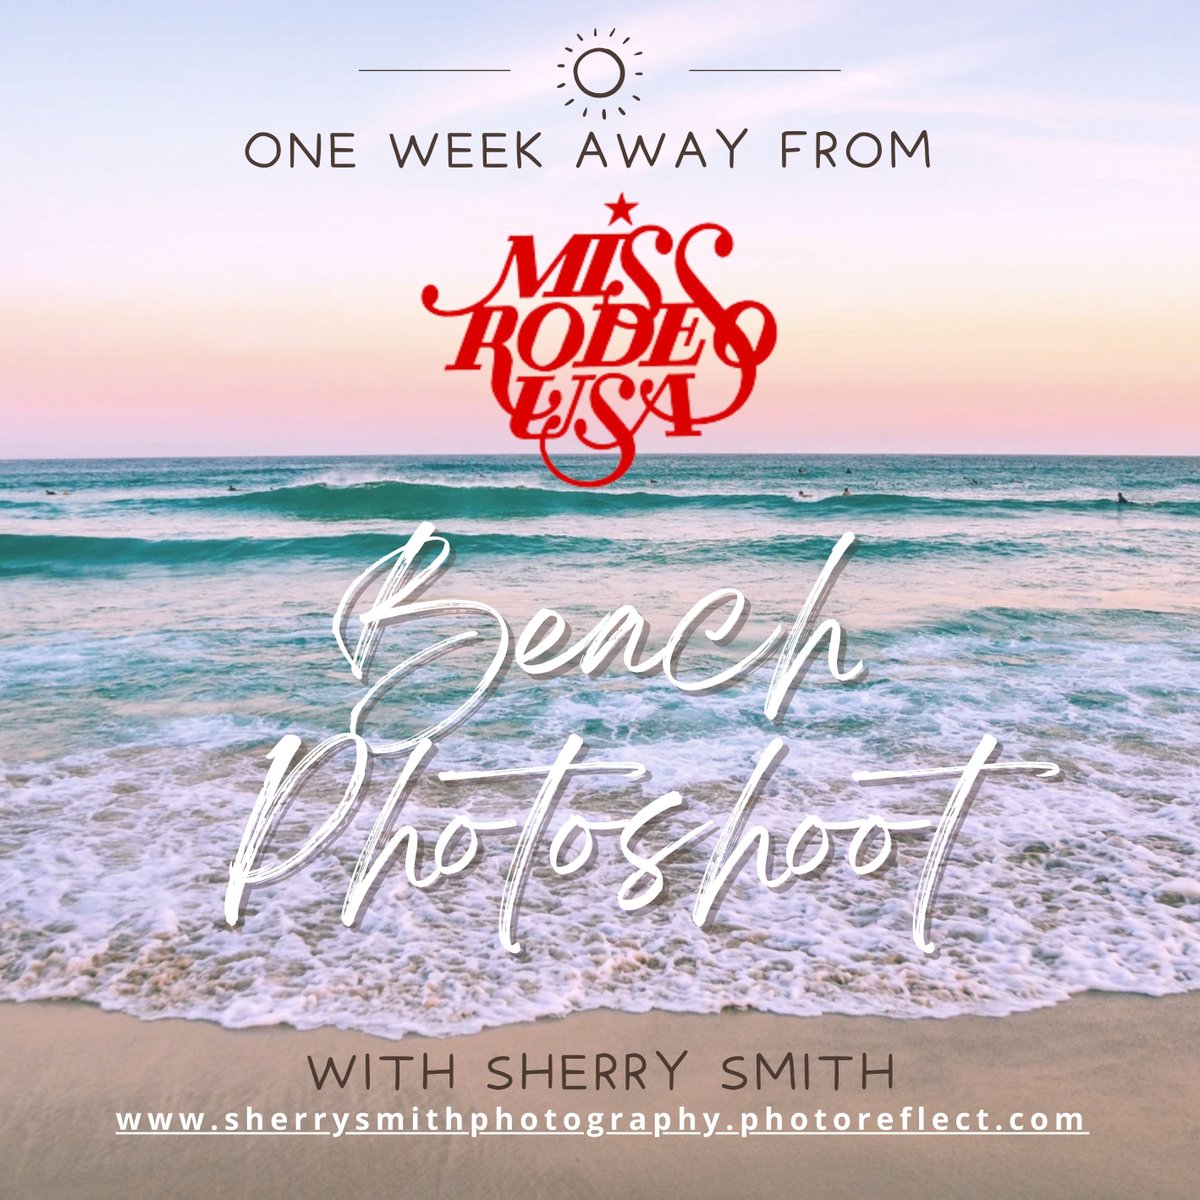 🌟 Just one week away from kicking off the Miss Rodeo USA Clinic in style at A BEACH PHOTOSHOOT with the incredible Sherry Smith! 📸 Three stunning looks, endless possibilities, and a whole lot of fun await. 🏖️ #MissRodeoUSA #BeachPhotoshoot #CountdownBegins 📅